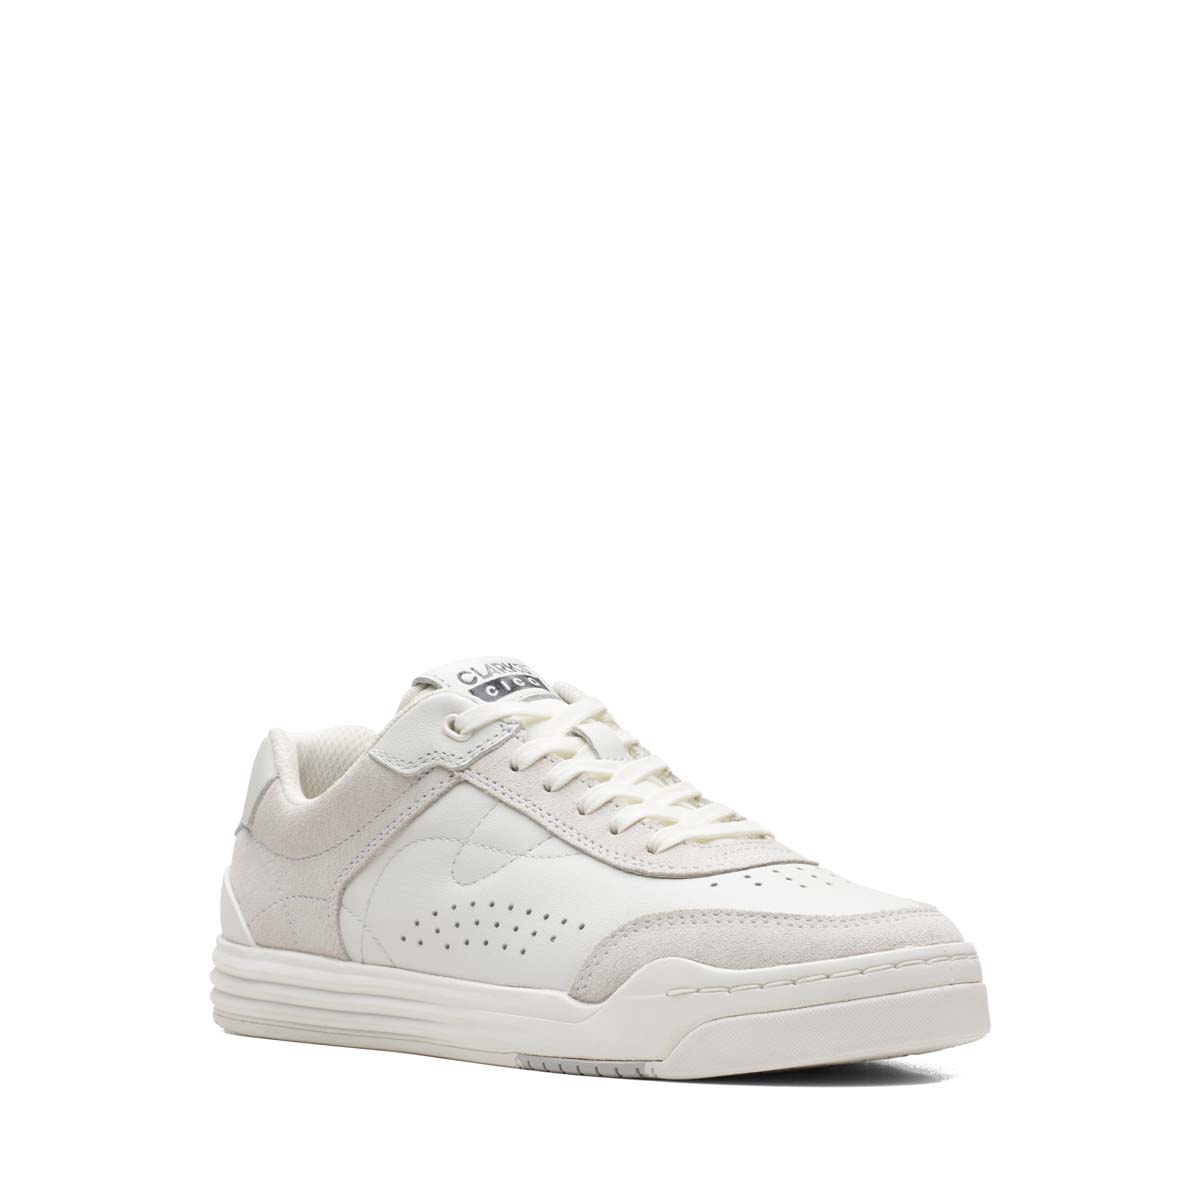 Clarks Cica 2.0 O White Leather Kids Boys Trainers 726347G In Size 4.5 In Plain White Leather G Width Fitting For kids